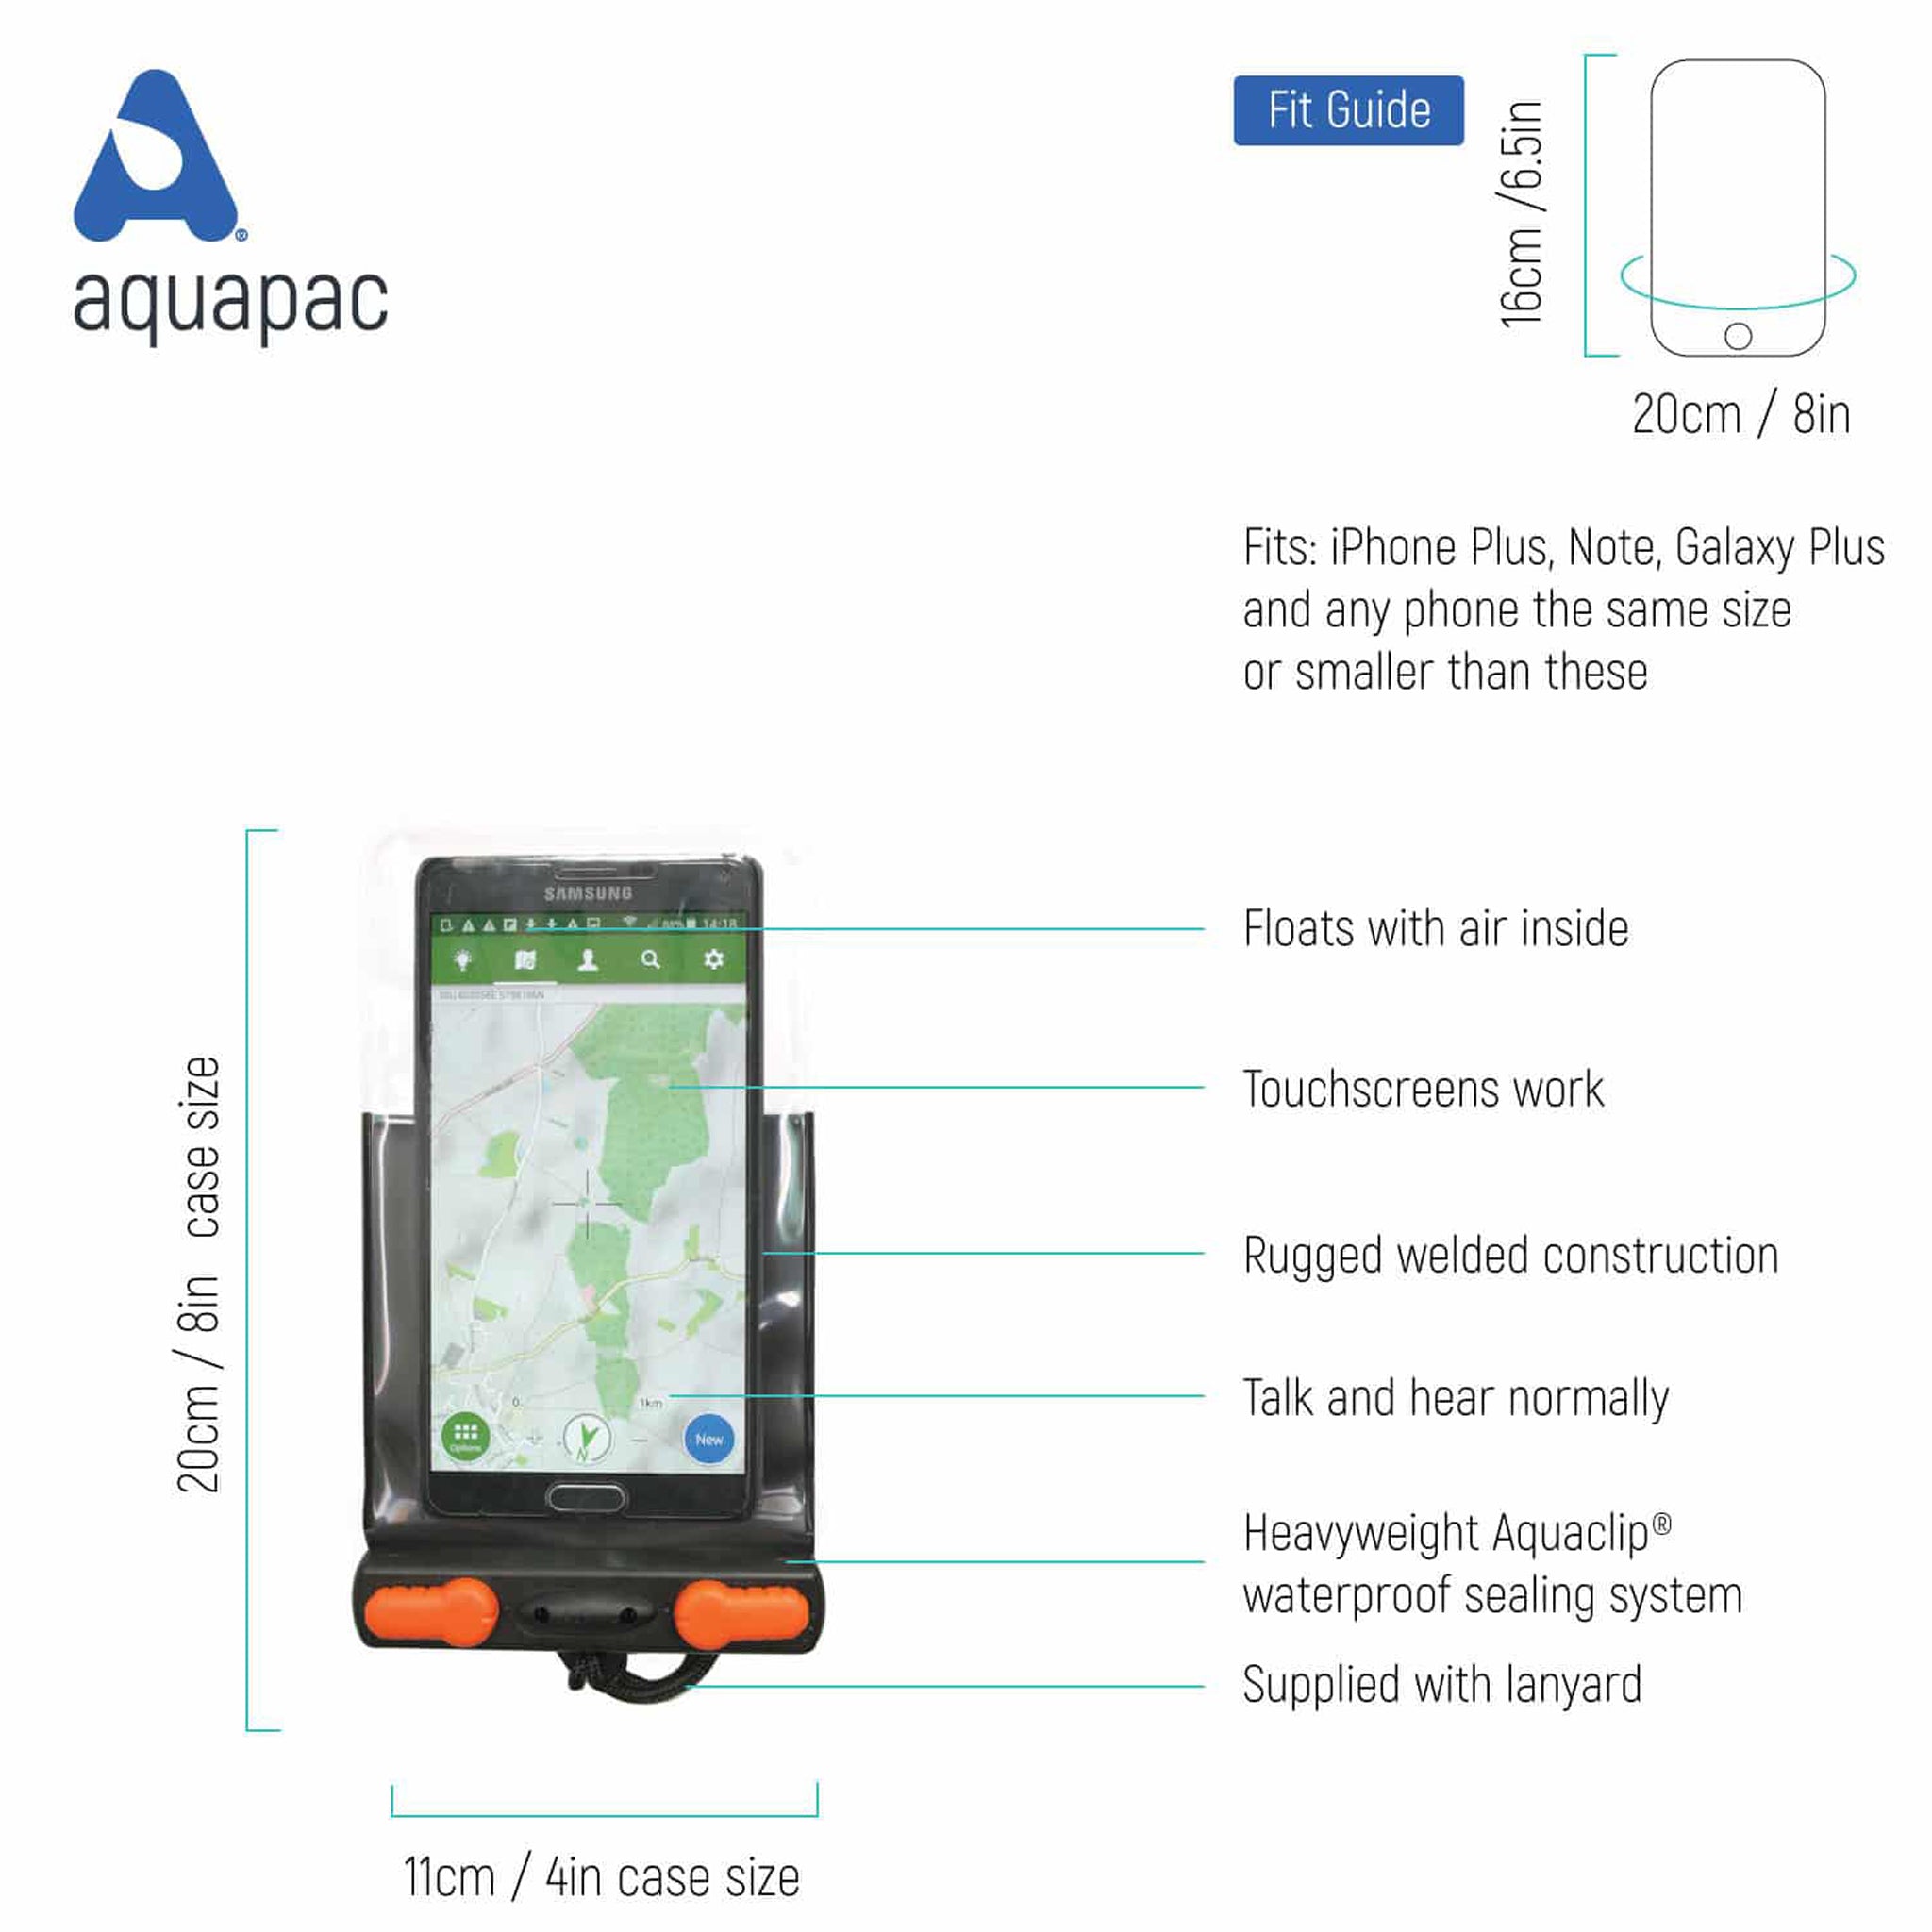 Aquapac Aquasac Economy Phone Dry Pouch Case Fits all iPhones up to 13 or similar | Dimensions